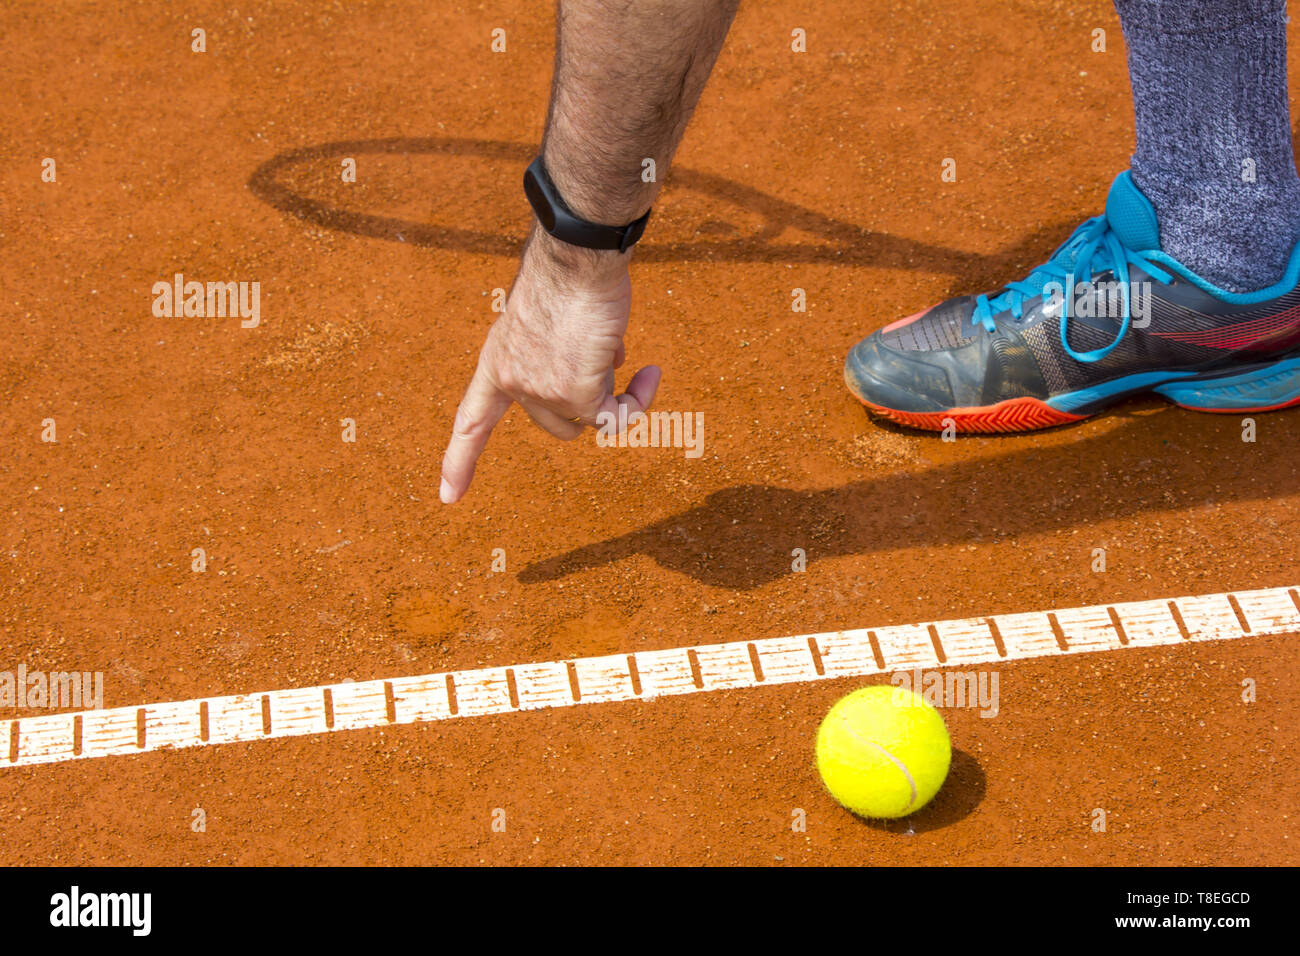 Tennis player shows the track on the tennis court Stock Photo